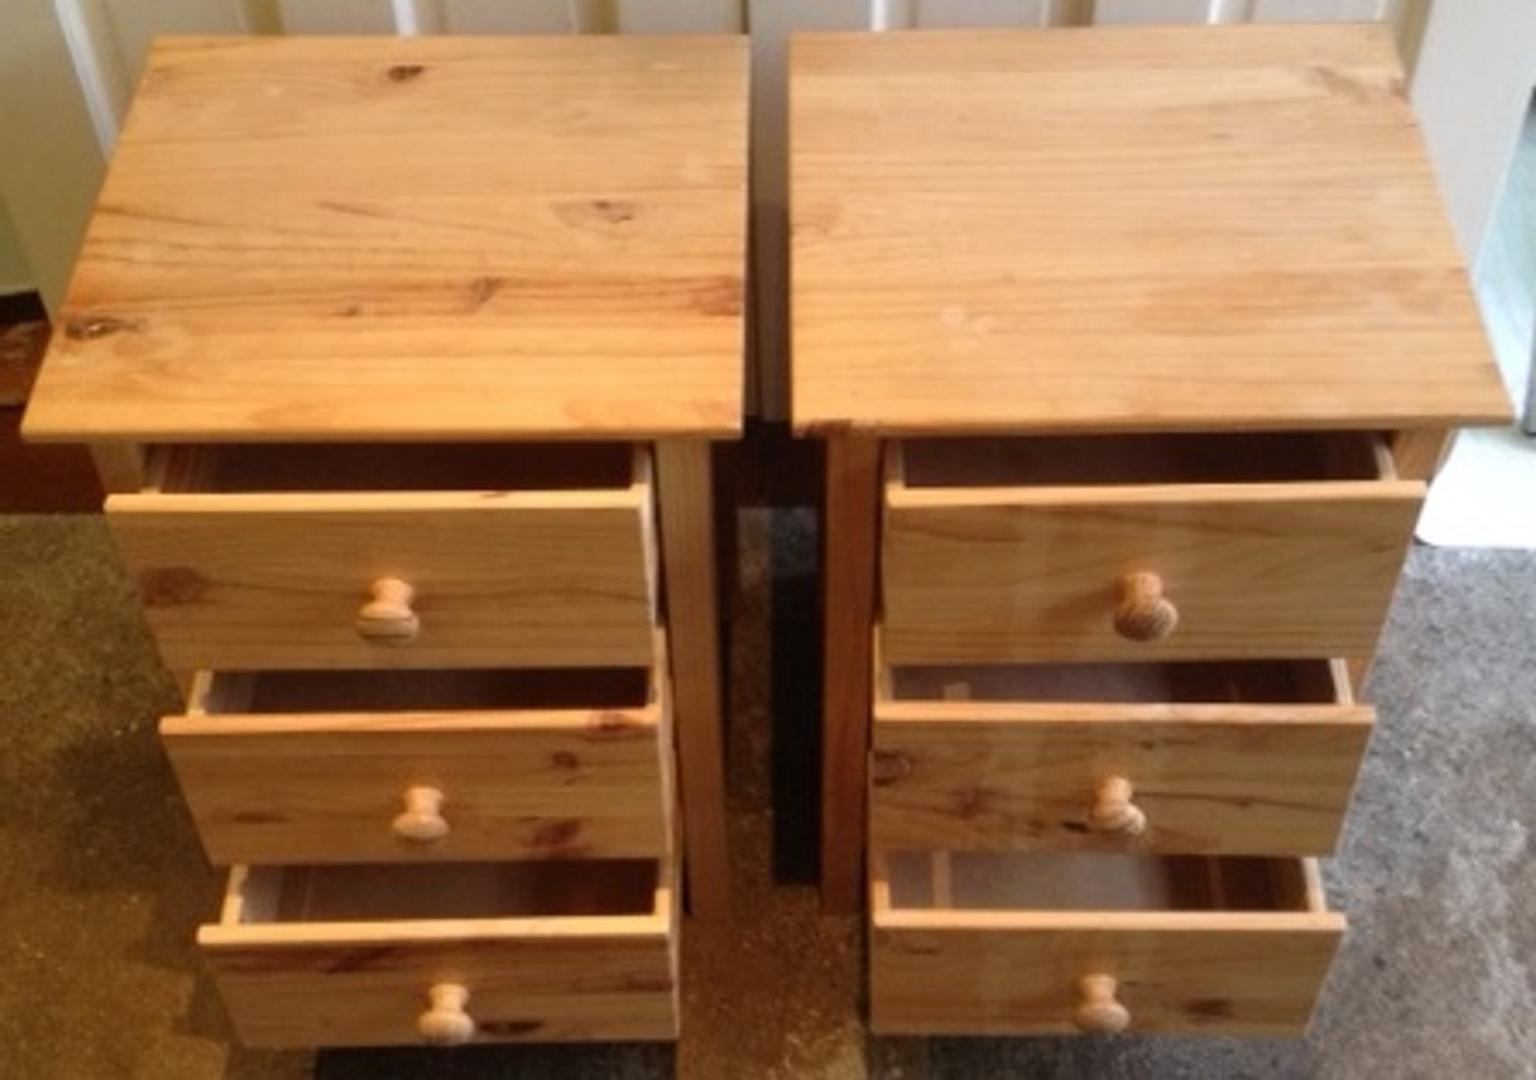 X2 3 Drawer Pine Bedside Cabinets In Kt17 London For 40 00 For